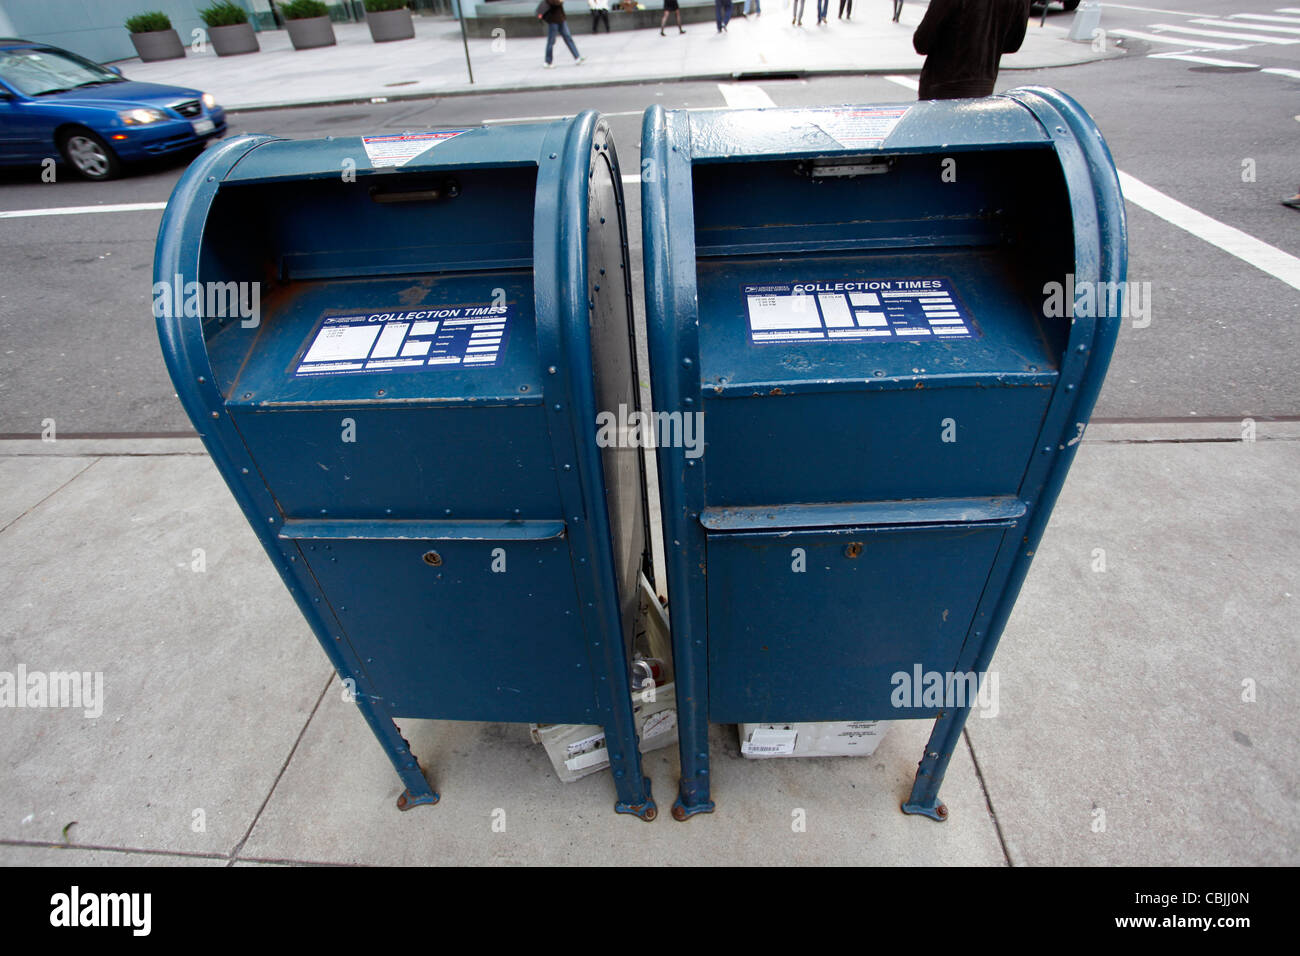 Blue New York post office box and mailboxes in New York, United States of America Stock Photo